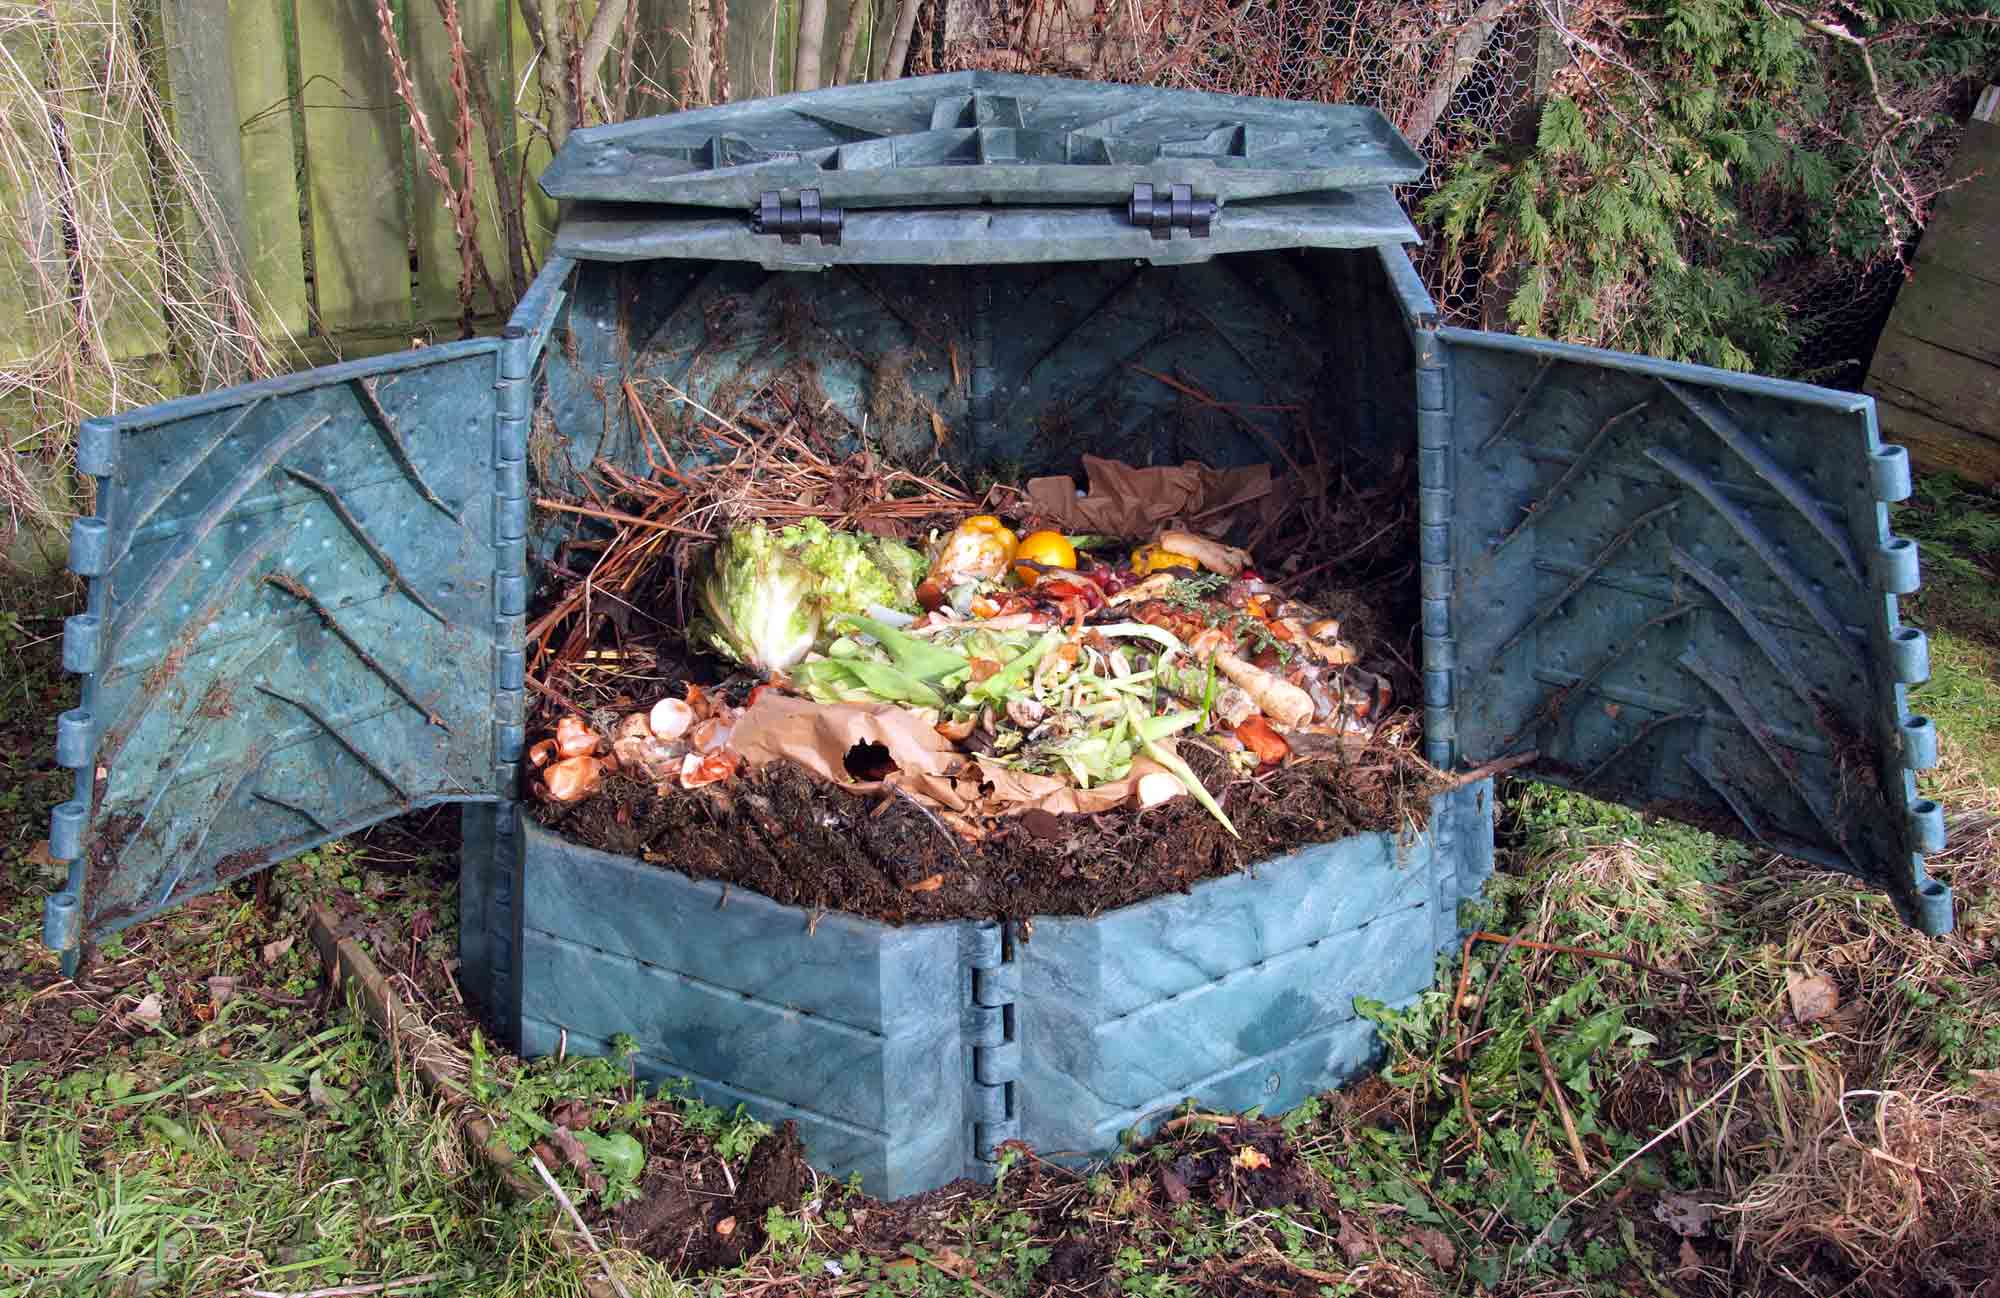 How can you compost at home?